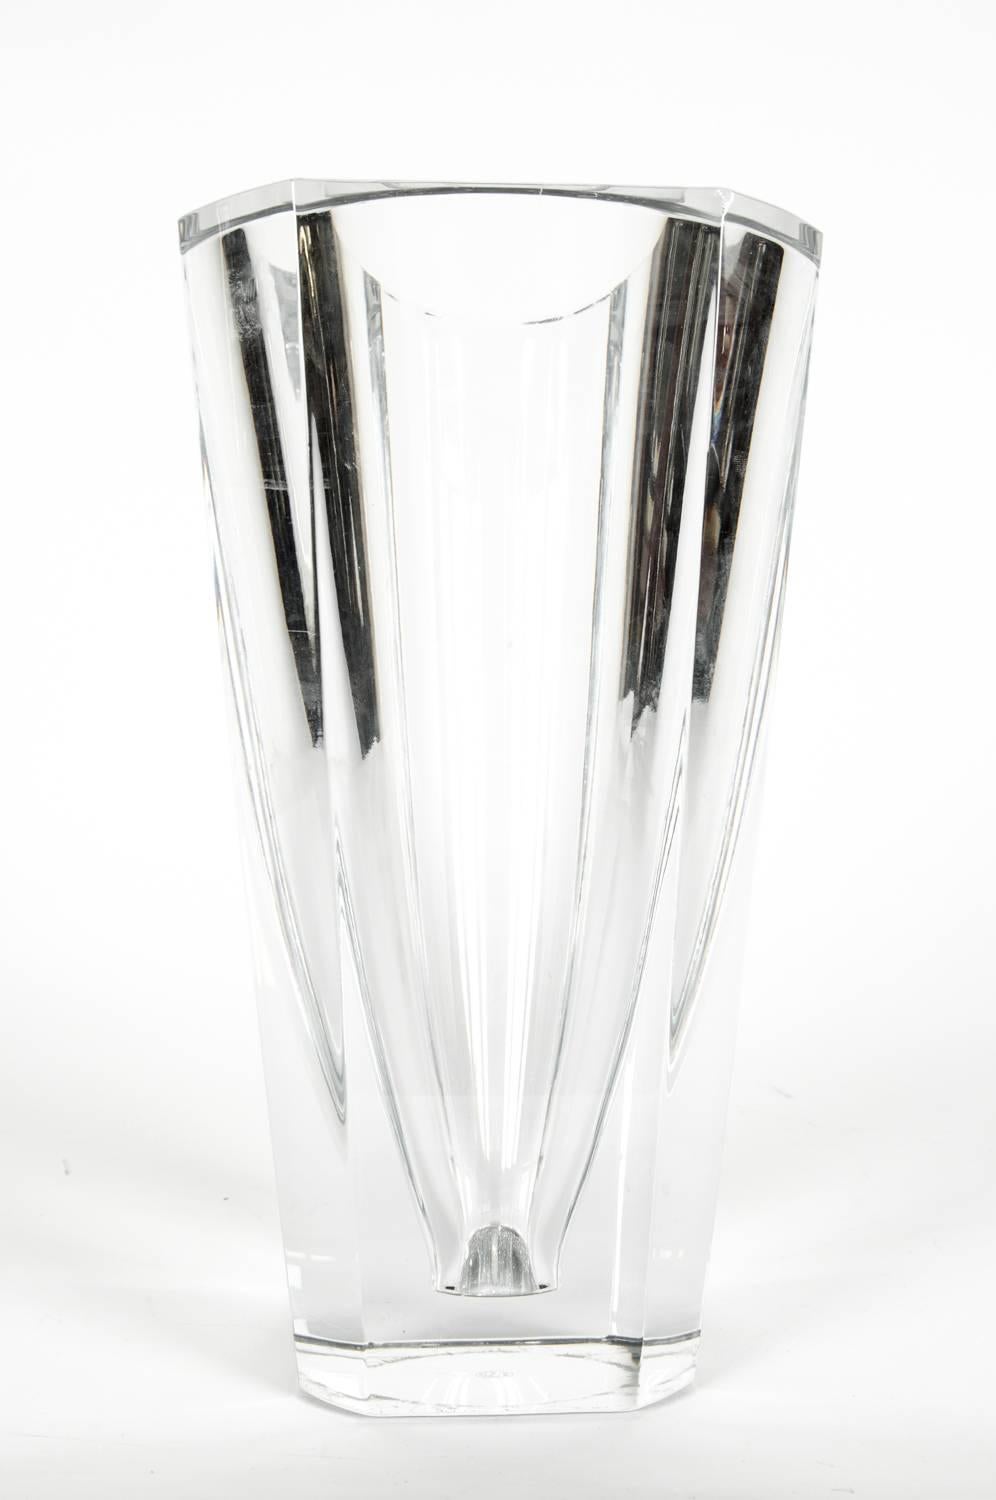 Large French Art Deco baccarat four-sided cut crystal vase / decorative piece. The vase is in excellent condition. Maker's mark undersigned. The vase measures about 12 inches high x 8 inches top diameter.
     